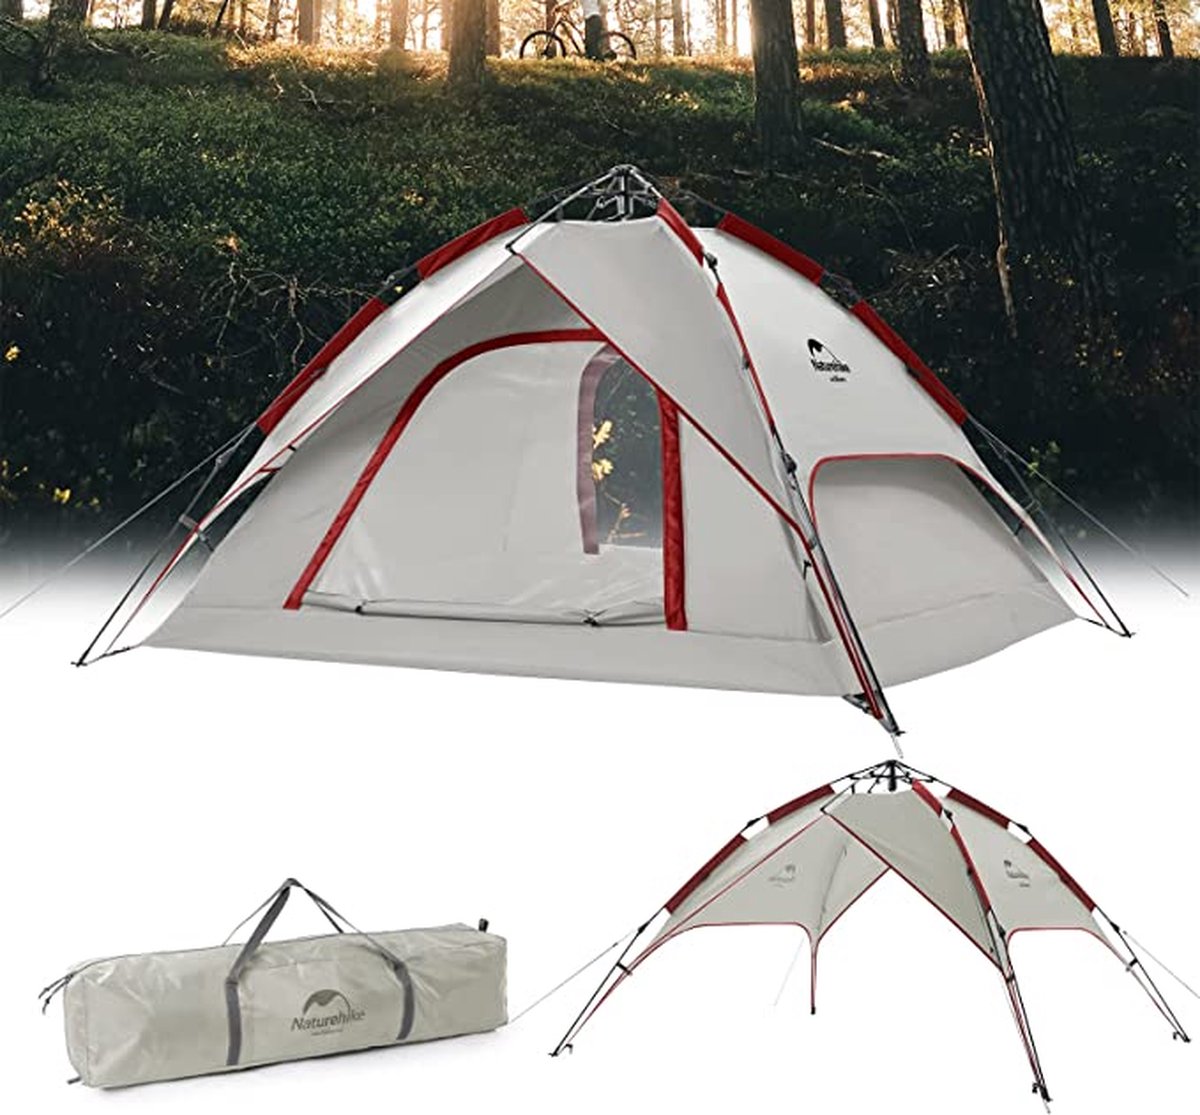 kamping tent / absolutely waterproof, lightweight camping tent with - Tent Ideal for Camping In The Garden, Dome Tent,